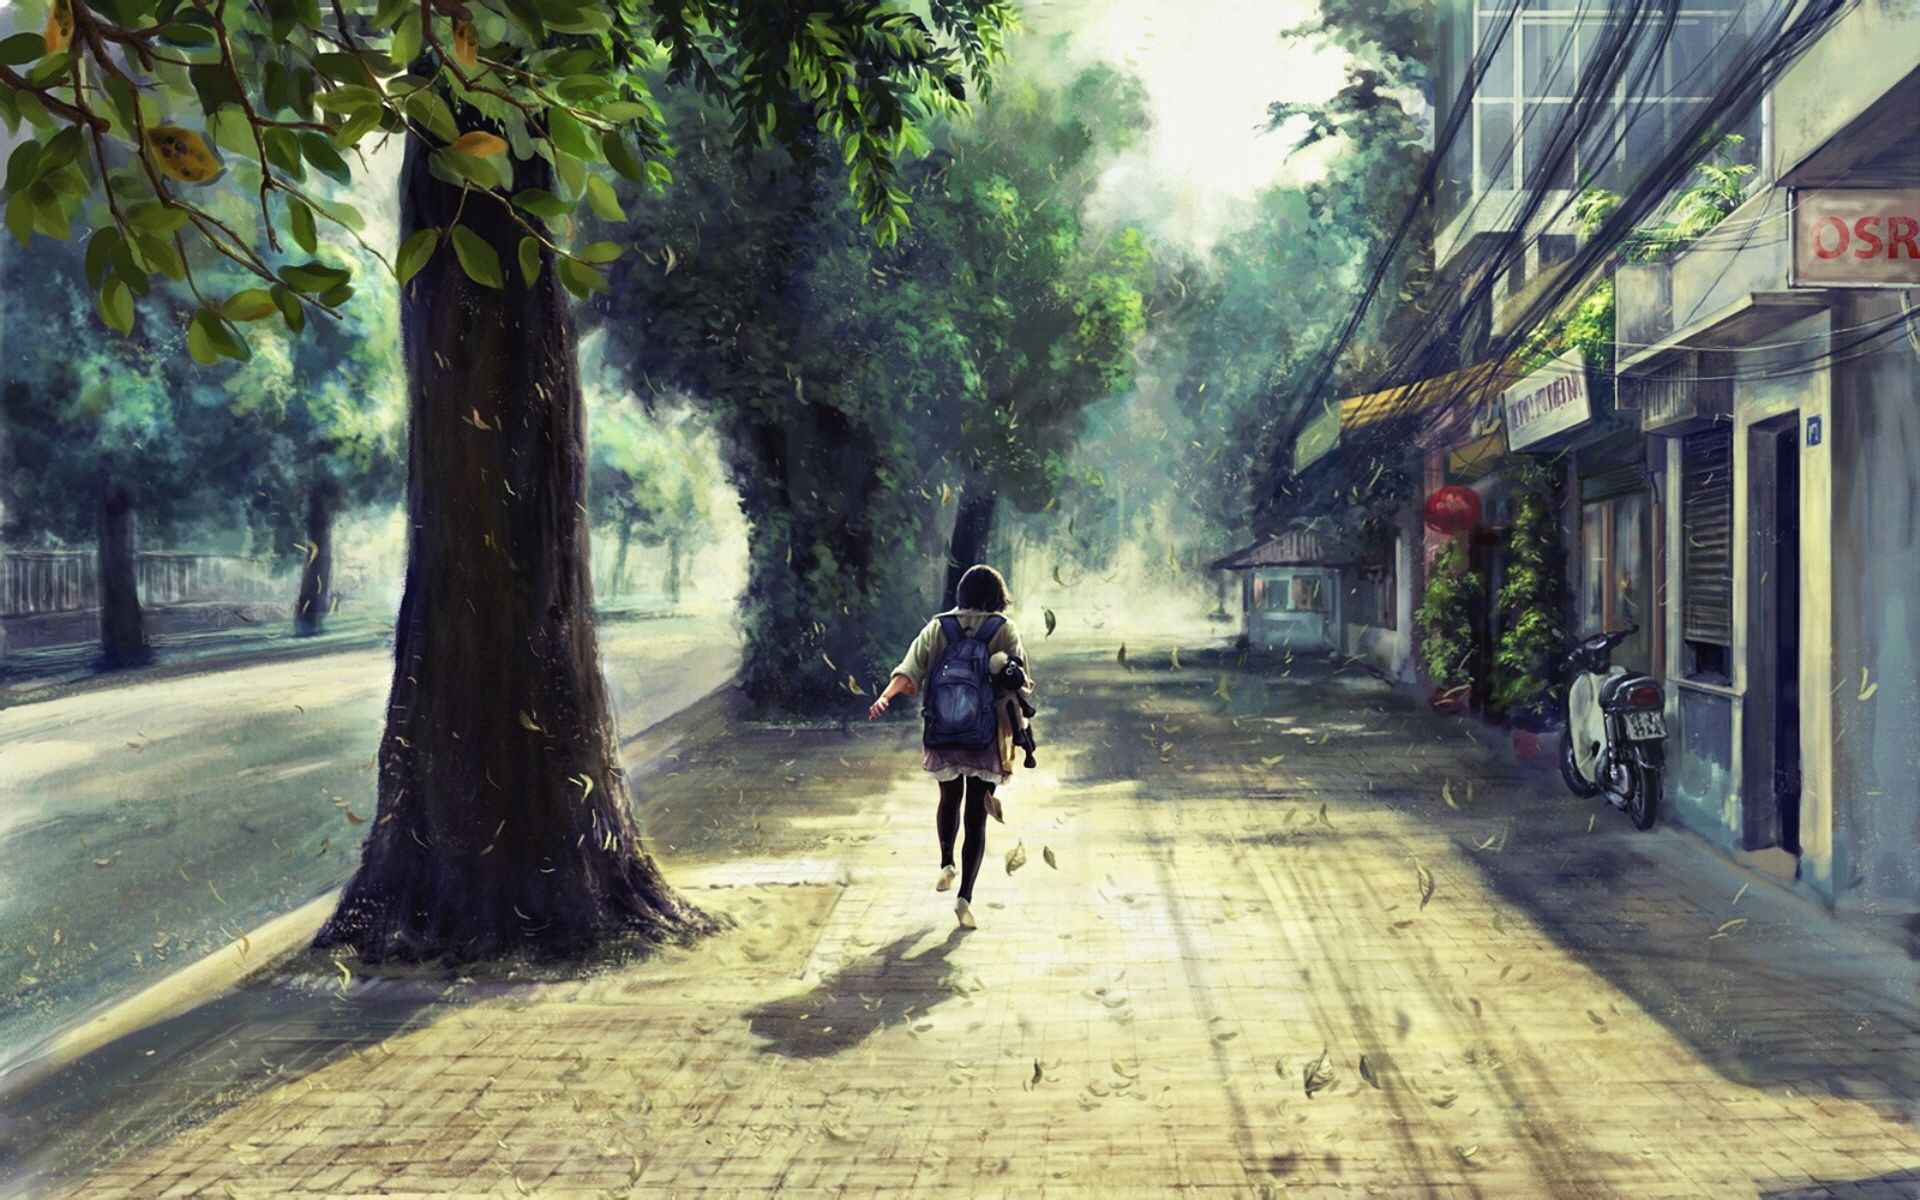 Through the empty streets by le thanh tung